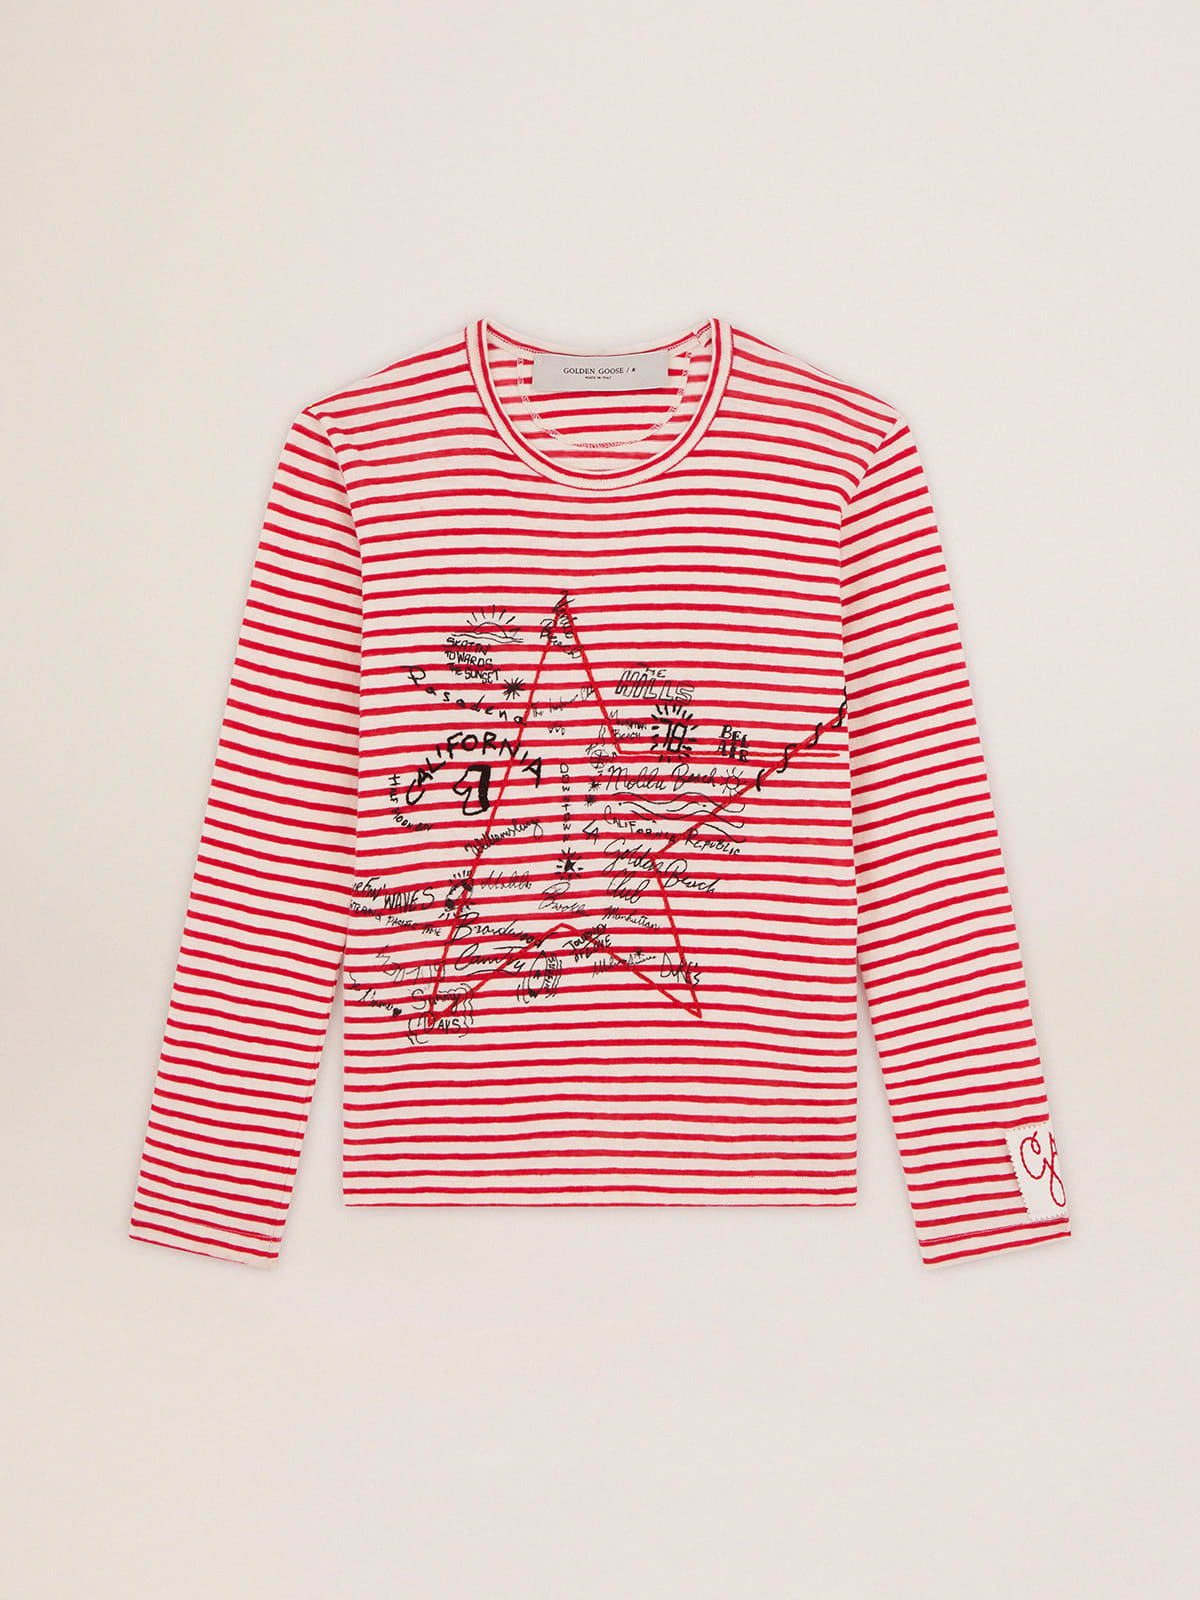 T-shirt with white and red stripes and embroidery on the front